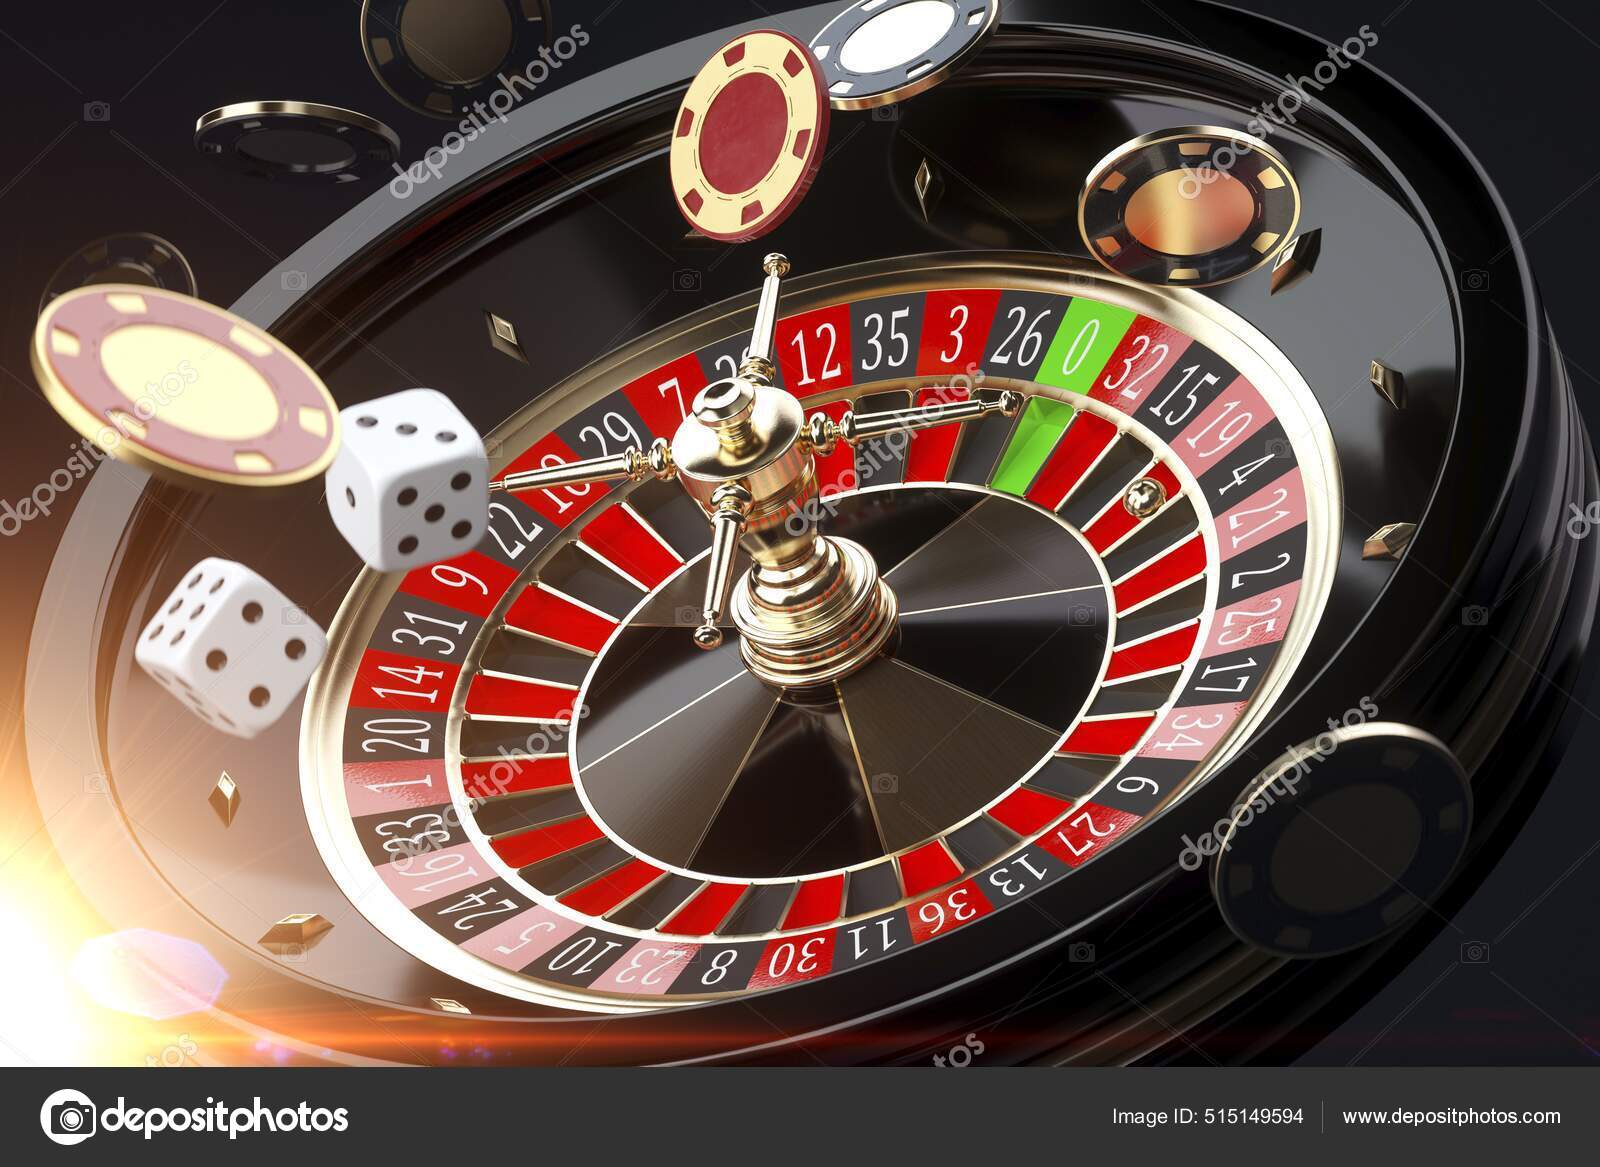 50 Reasons to The Advantages of Playing at No Deposit Casinos in India in 2021